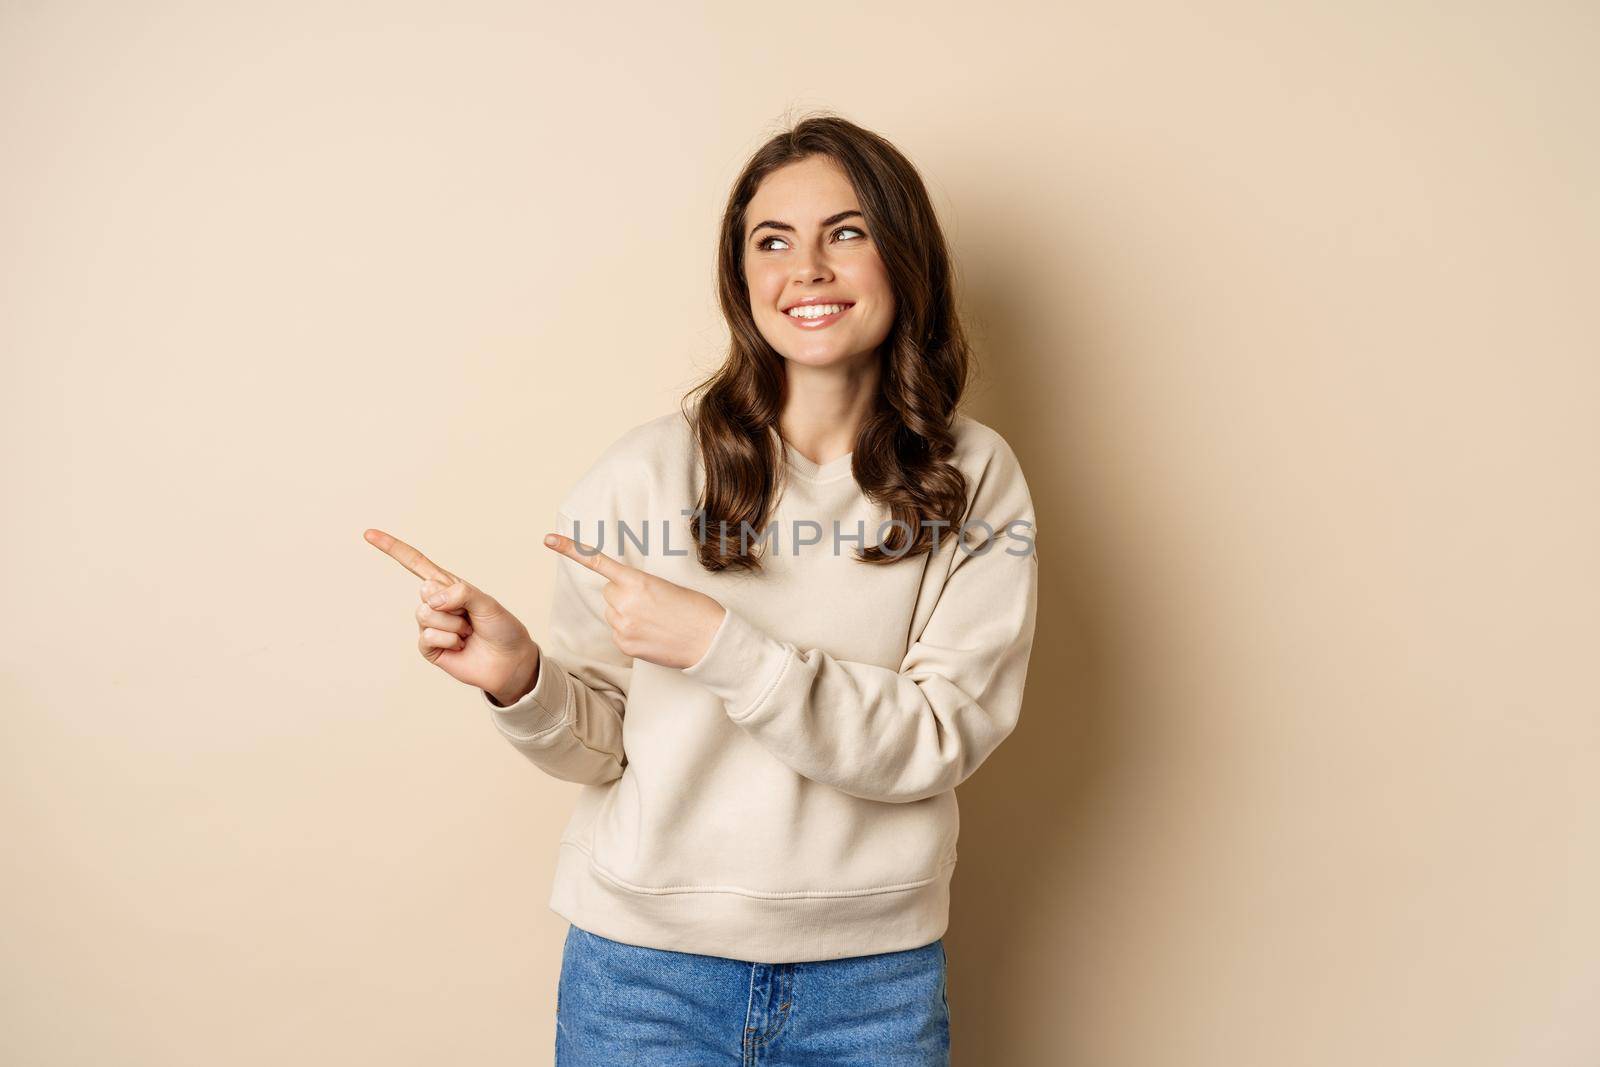 Beautiful girl pointing and looking left, laughing and smiling happy while showing advertisement, logo or store banner, beige background.